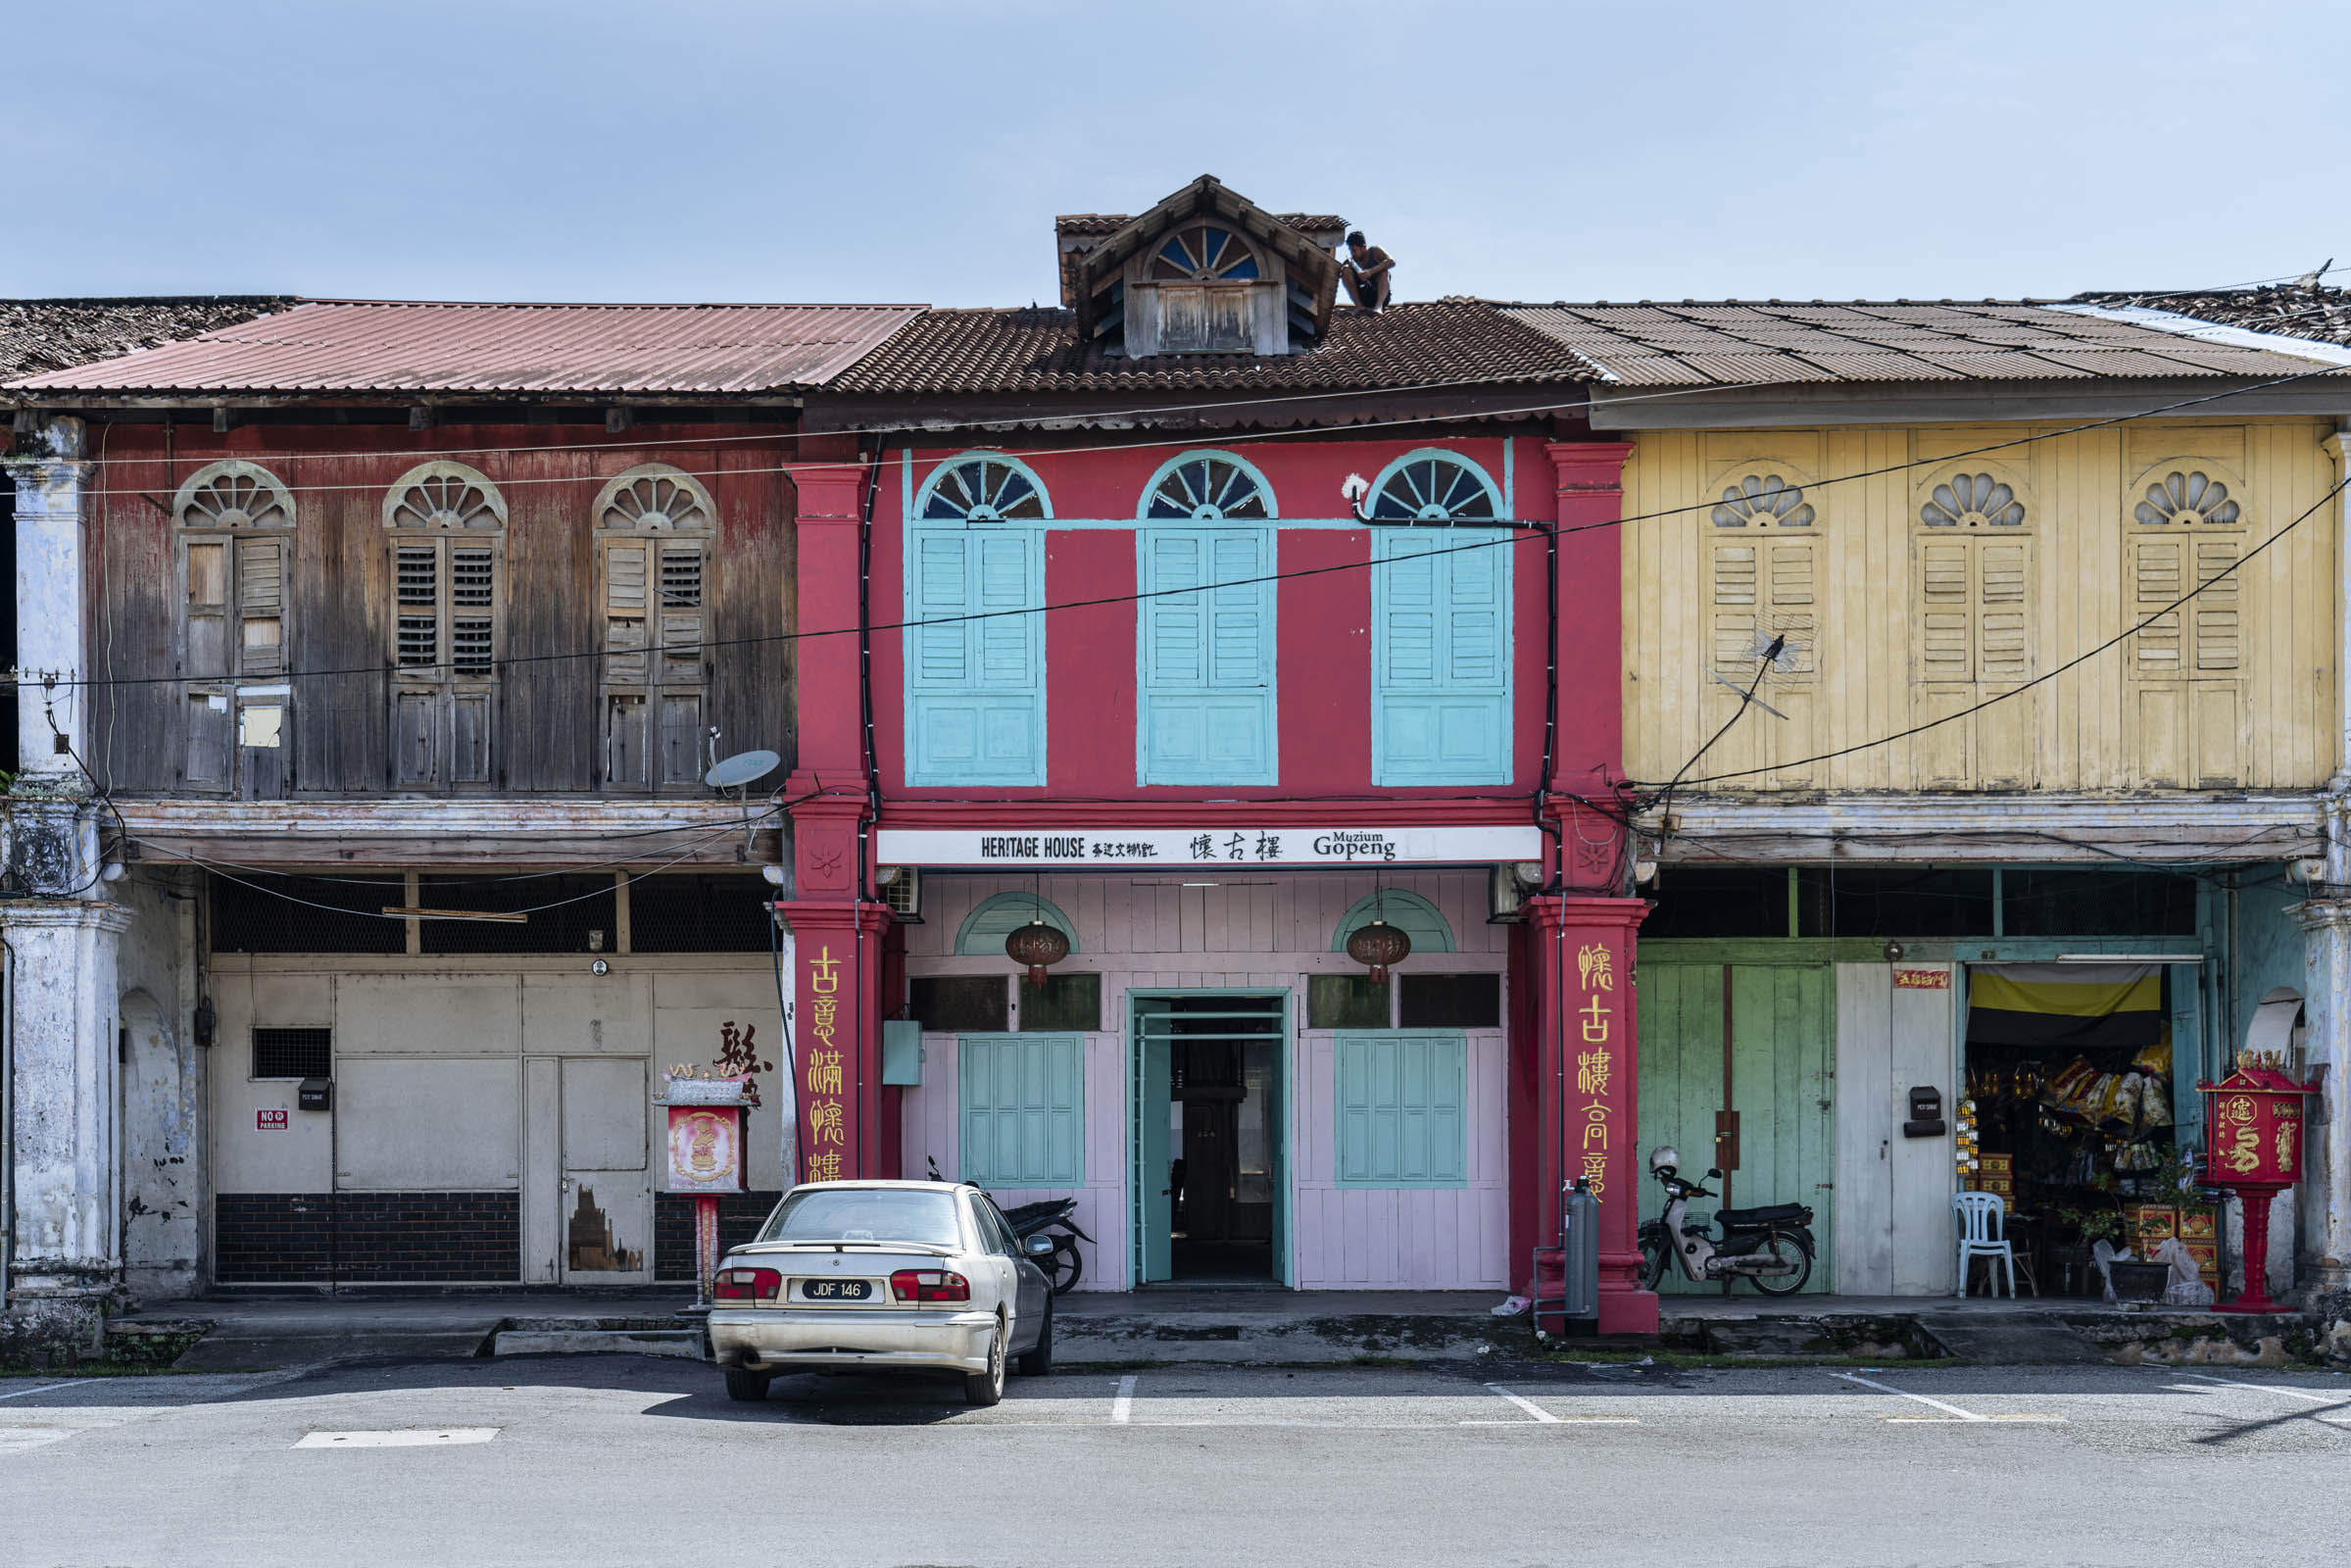 Museum Gopeng facade. Photo by Teoh Eng Hooi.